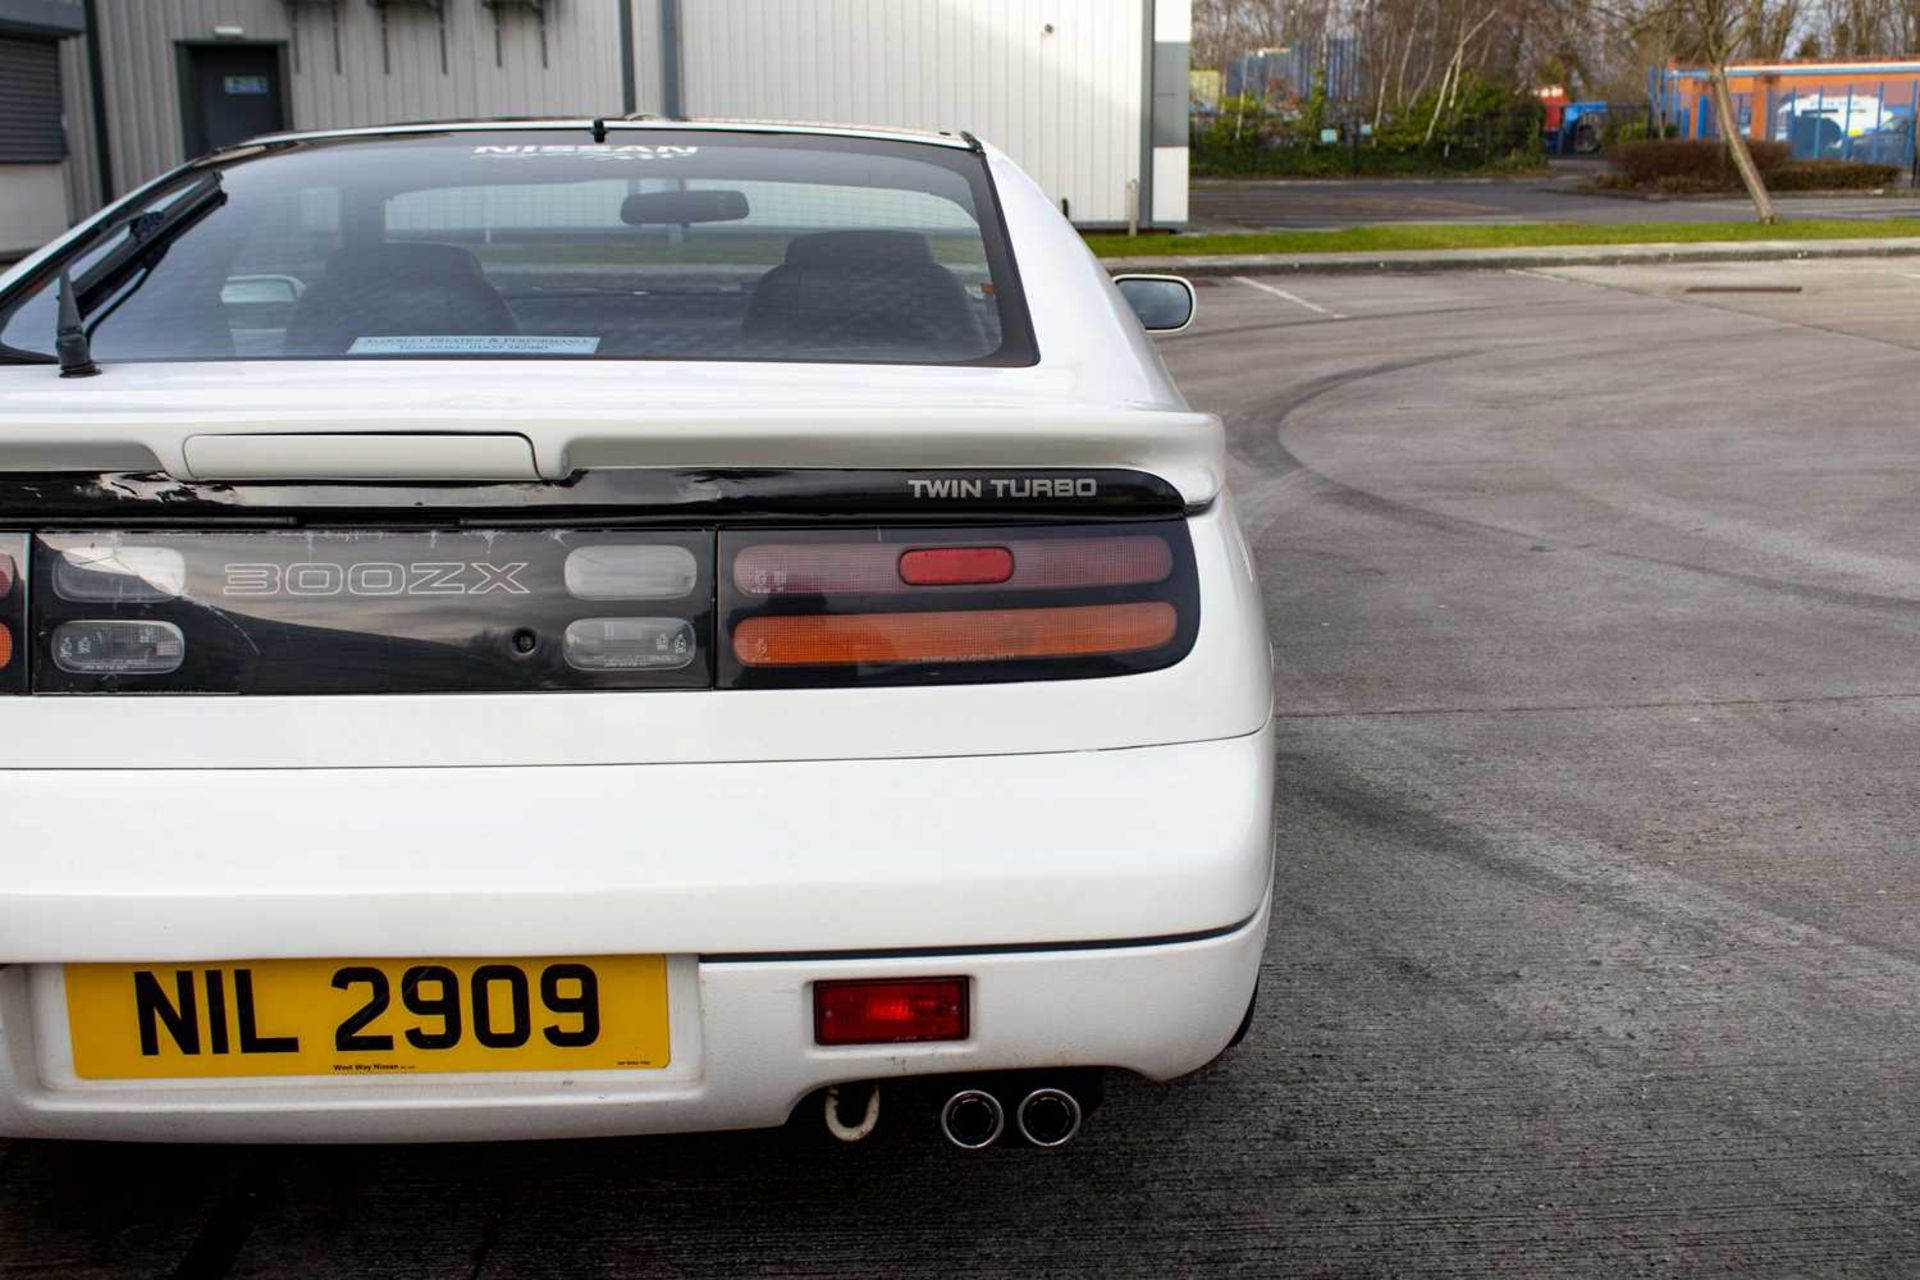 1991 Nissan 300ZX Twin Turbo  ***NO RESERVE***  UK car and the same owner for the last 24 years  - Image 18 of 103